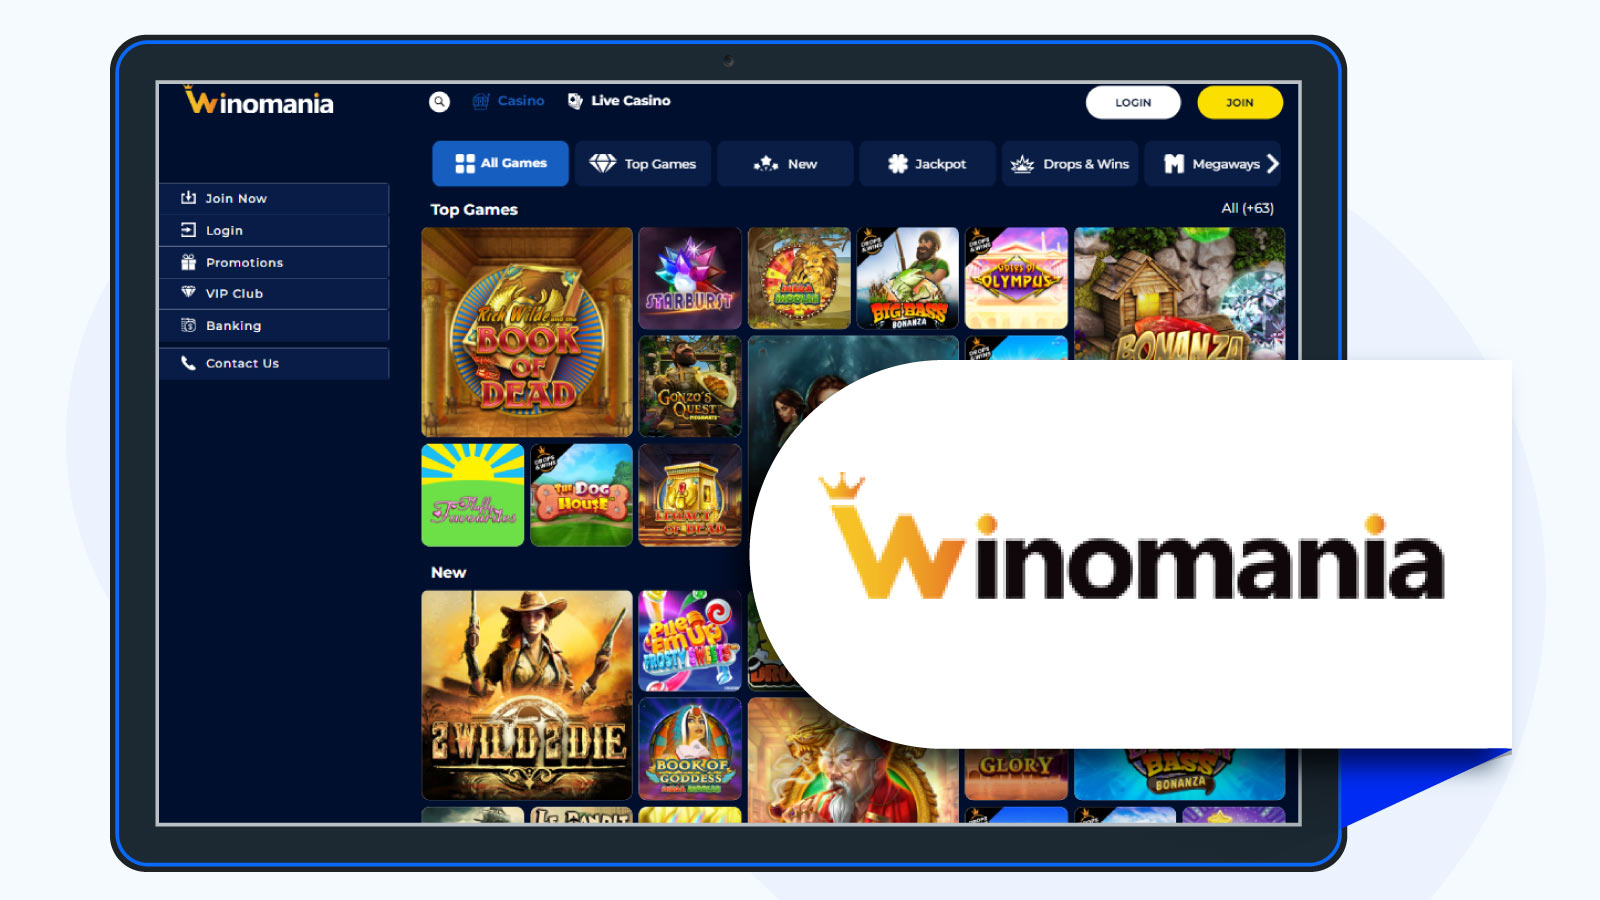 Find-Even-More-Payment-Alternatives-at-Winomania-Casino